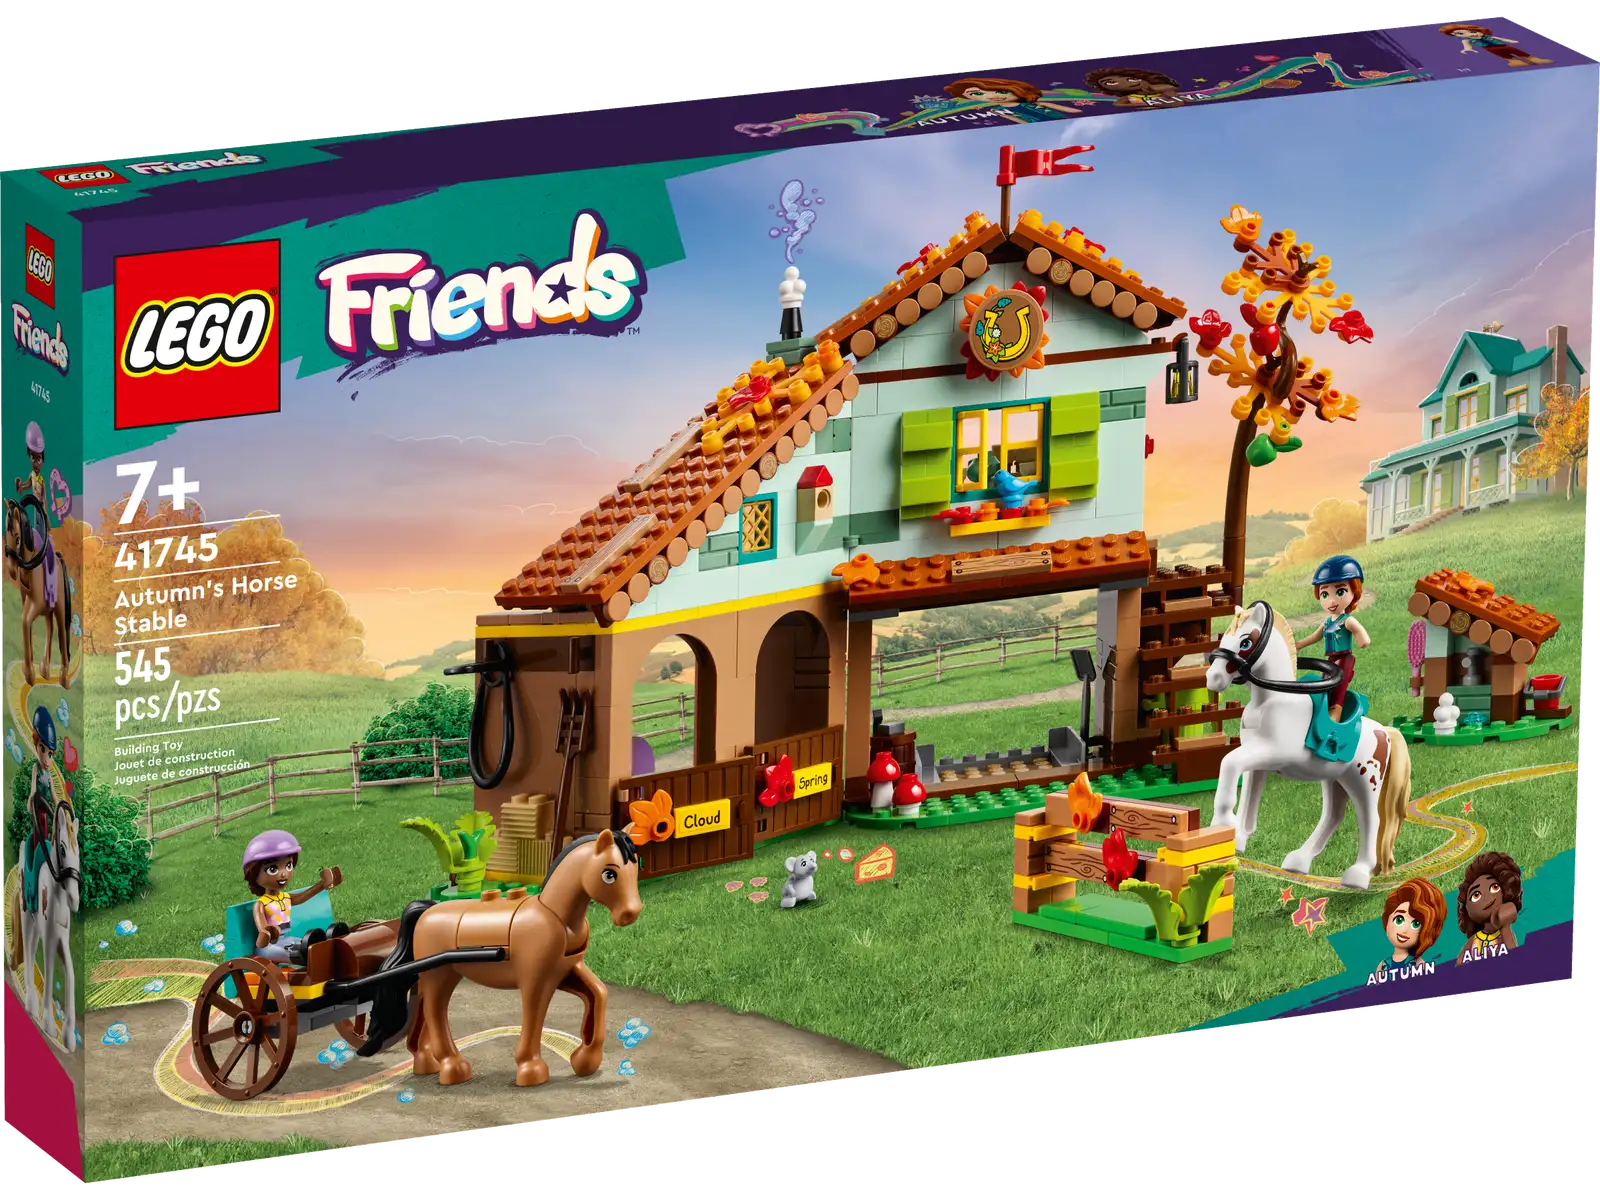 Give little horse lovers ages 7 and up a treat with this LEGO® Friends Autumn’s Horse Stable (41745) buildable toy. The set comes with Autumn and Aliya mini-dolls, plus 2 horse characters and accessories for creative play. Kids can care for the horses and hitch them to the carriage, before going for a ride. They can enjoy getting to know the characters too. Autumn and Aliya have very different personalities but are the best of friends. They are just as happy spending quiet time together as theyare having adventures. Above the stables, there is a cozy kitchen and a sleeping area complete with hay beds. Just what every horse lover dreams of! Boost the fun Kids can enjoy an easy and intuitive building adventure with the LEGO Builder app. Here they can zoom in and rotate models in 3D, save sets and track their progress. Welcome to the next generation of Heartlake City Kids can make friends, discover exciting locations and act out real-life adventures in the LEGO Friends universe. Horse-care fun for kids aged 7+ – Young horse lovers can imagine caring for their own horses as they build and play with this fun LEGO® Friends Autumn’s Horse Stable toy (41745) 2 mini-dolls and accessories – The set comes with LEGO® Friends characters Autumn and Aliya, plus 2 horse characters and lots of horse-care accessories Look after the horses – The accessories help kids learn about caring for horses and include a pitchfork, shovel, brush, bucket and a hammer to check the horseshoes Let’s take a ride! – The set includes a carriage with space for both mini-dolls. There’s also an obstacle for the horses to jump over and lots of horse-care accessories A gift for horse lovers – Know a child who adores horses? This buildable stable set makes a gift idea for any horseback rider or animal lover aged 7 and up Sized for young builders – The toy horse stable measures over 7.5 in. (19 cm) high, 11 in. (28 cm) wide and 5.5 in. (14 cm) deep A helping hand – Discover intuitive instructions in the LEGO® Builder app, where builders can zoom in and rotate models in 3D, track their progress and save sets as they develop new skills A new generation of Heartlake City – In January 2023, the LEGO® Friends universe expanded to introduce new characters and new locations to inspire more role-play adventures A quality product – All LEGO® components meet strict industry standards to ensure they are consistent, compatible and easy to build with: it’s been that way since 1958 Safety first – LEGO® Friends bricks and pieces are dropped, heated, crushed, twisted and analyzed to make sure they meet stringent global safety standards